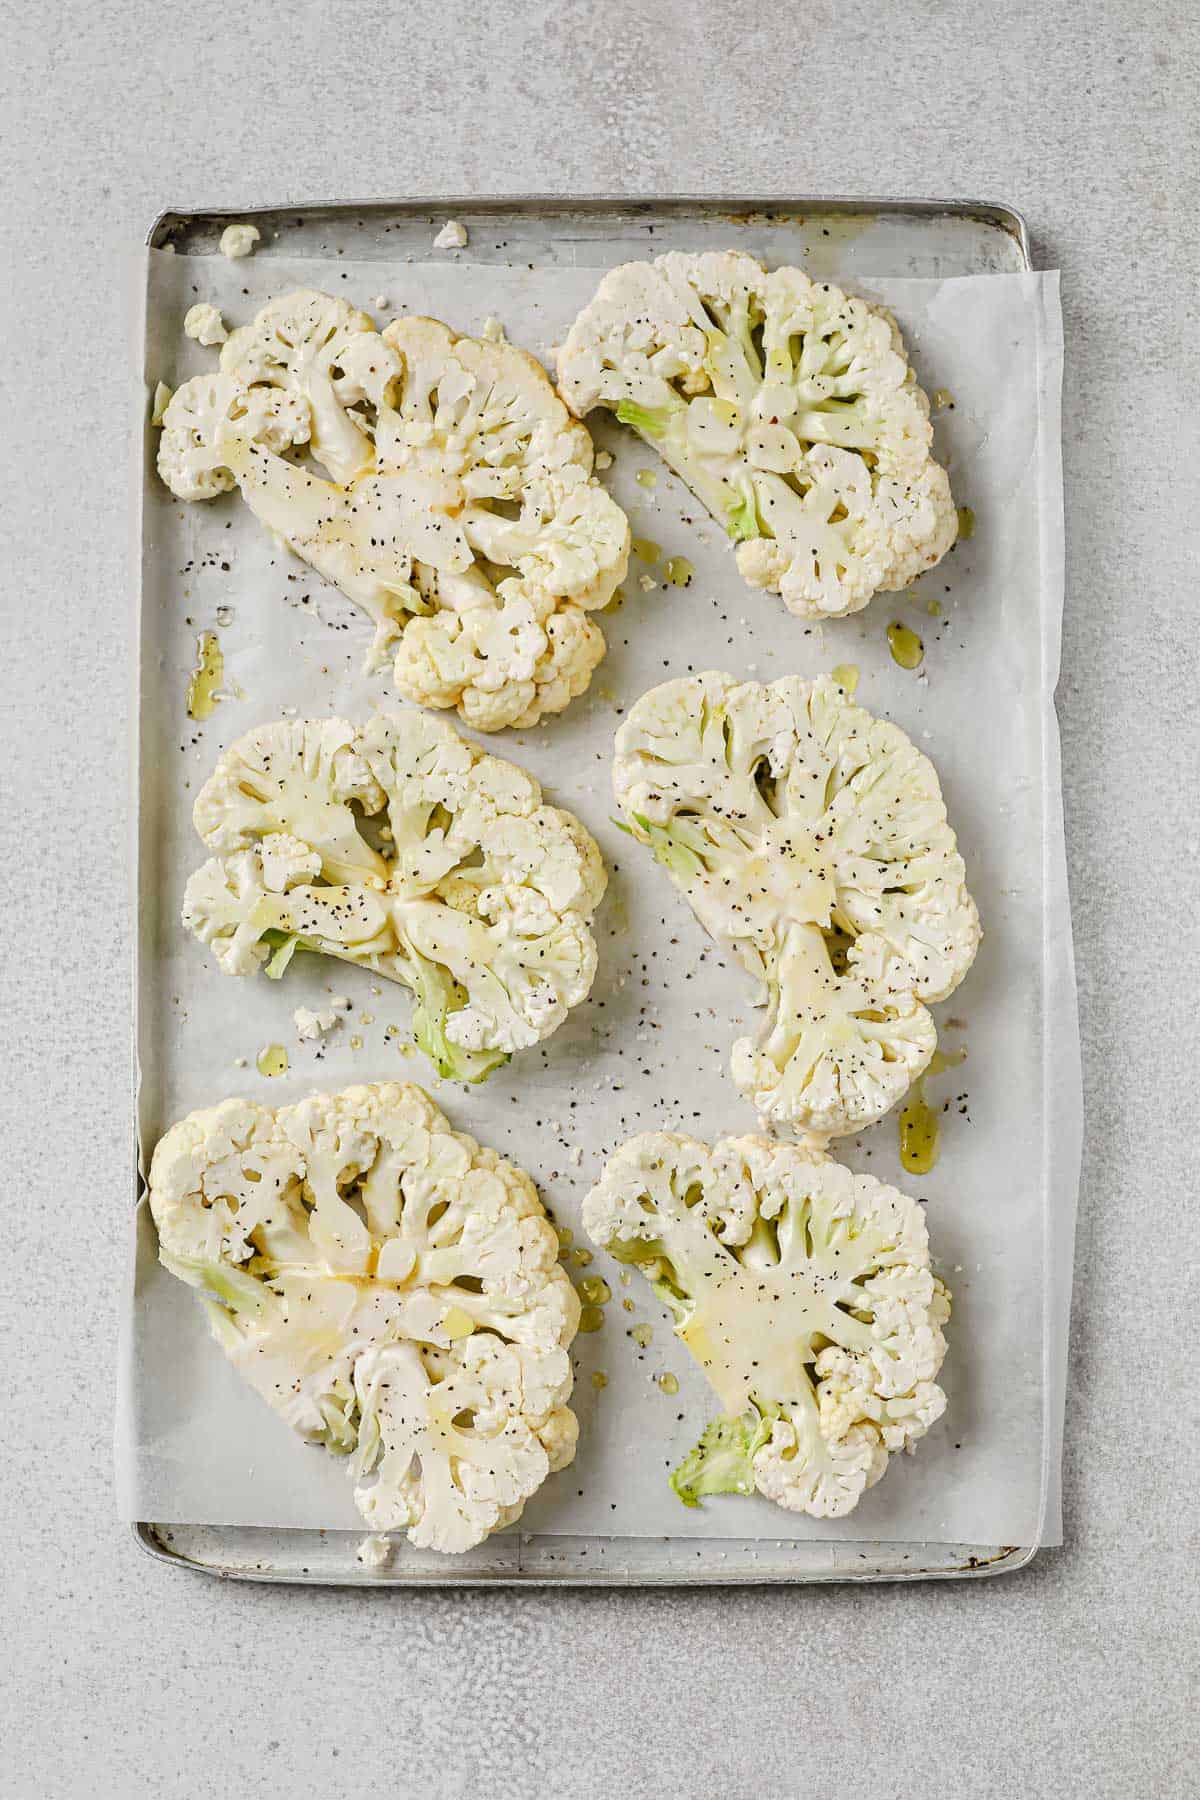 Cauliflower sliced into steaks and spread on a baking sheet, seasoned with olive oil, salt and pepper